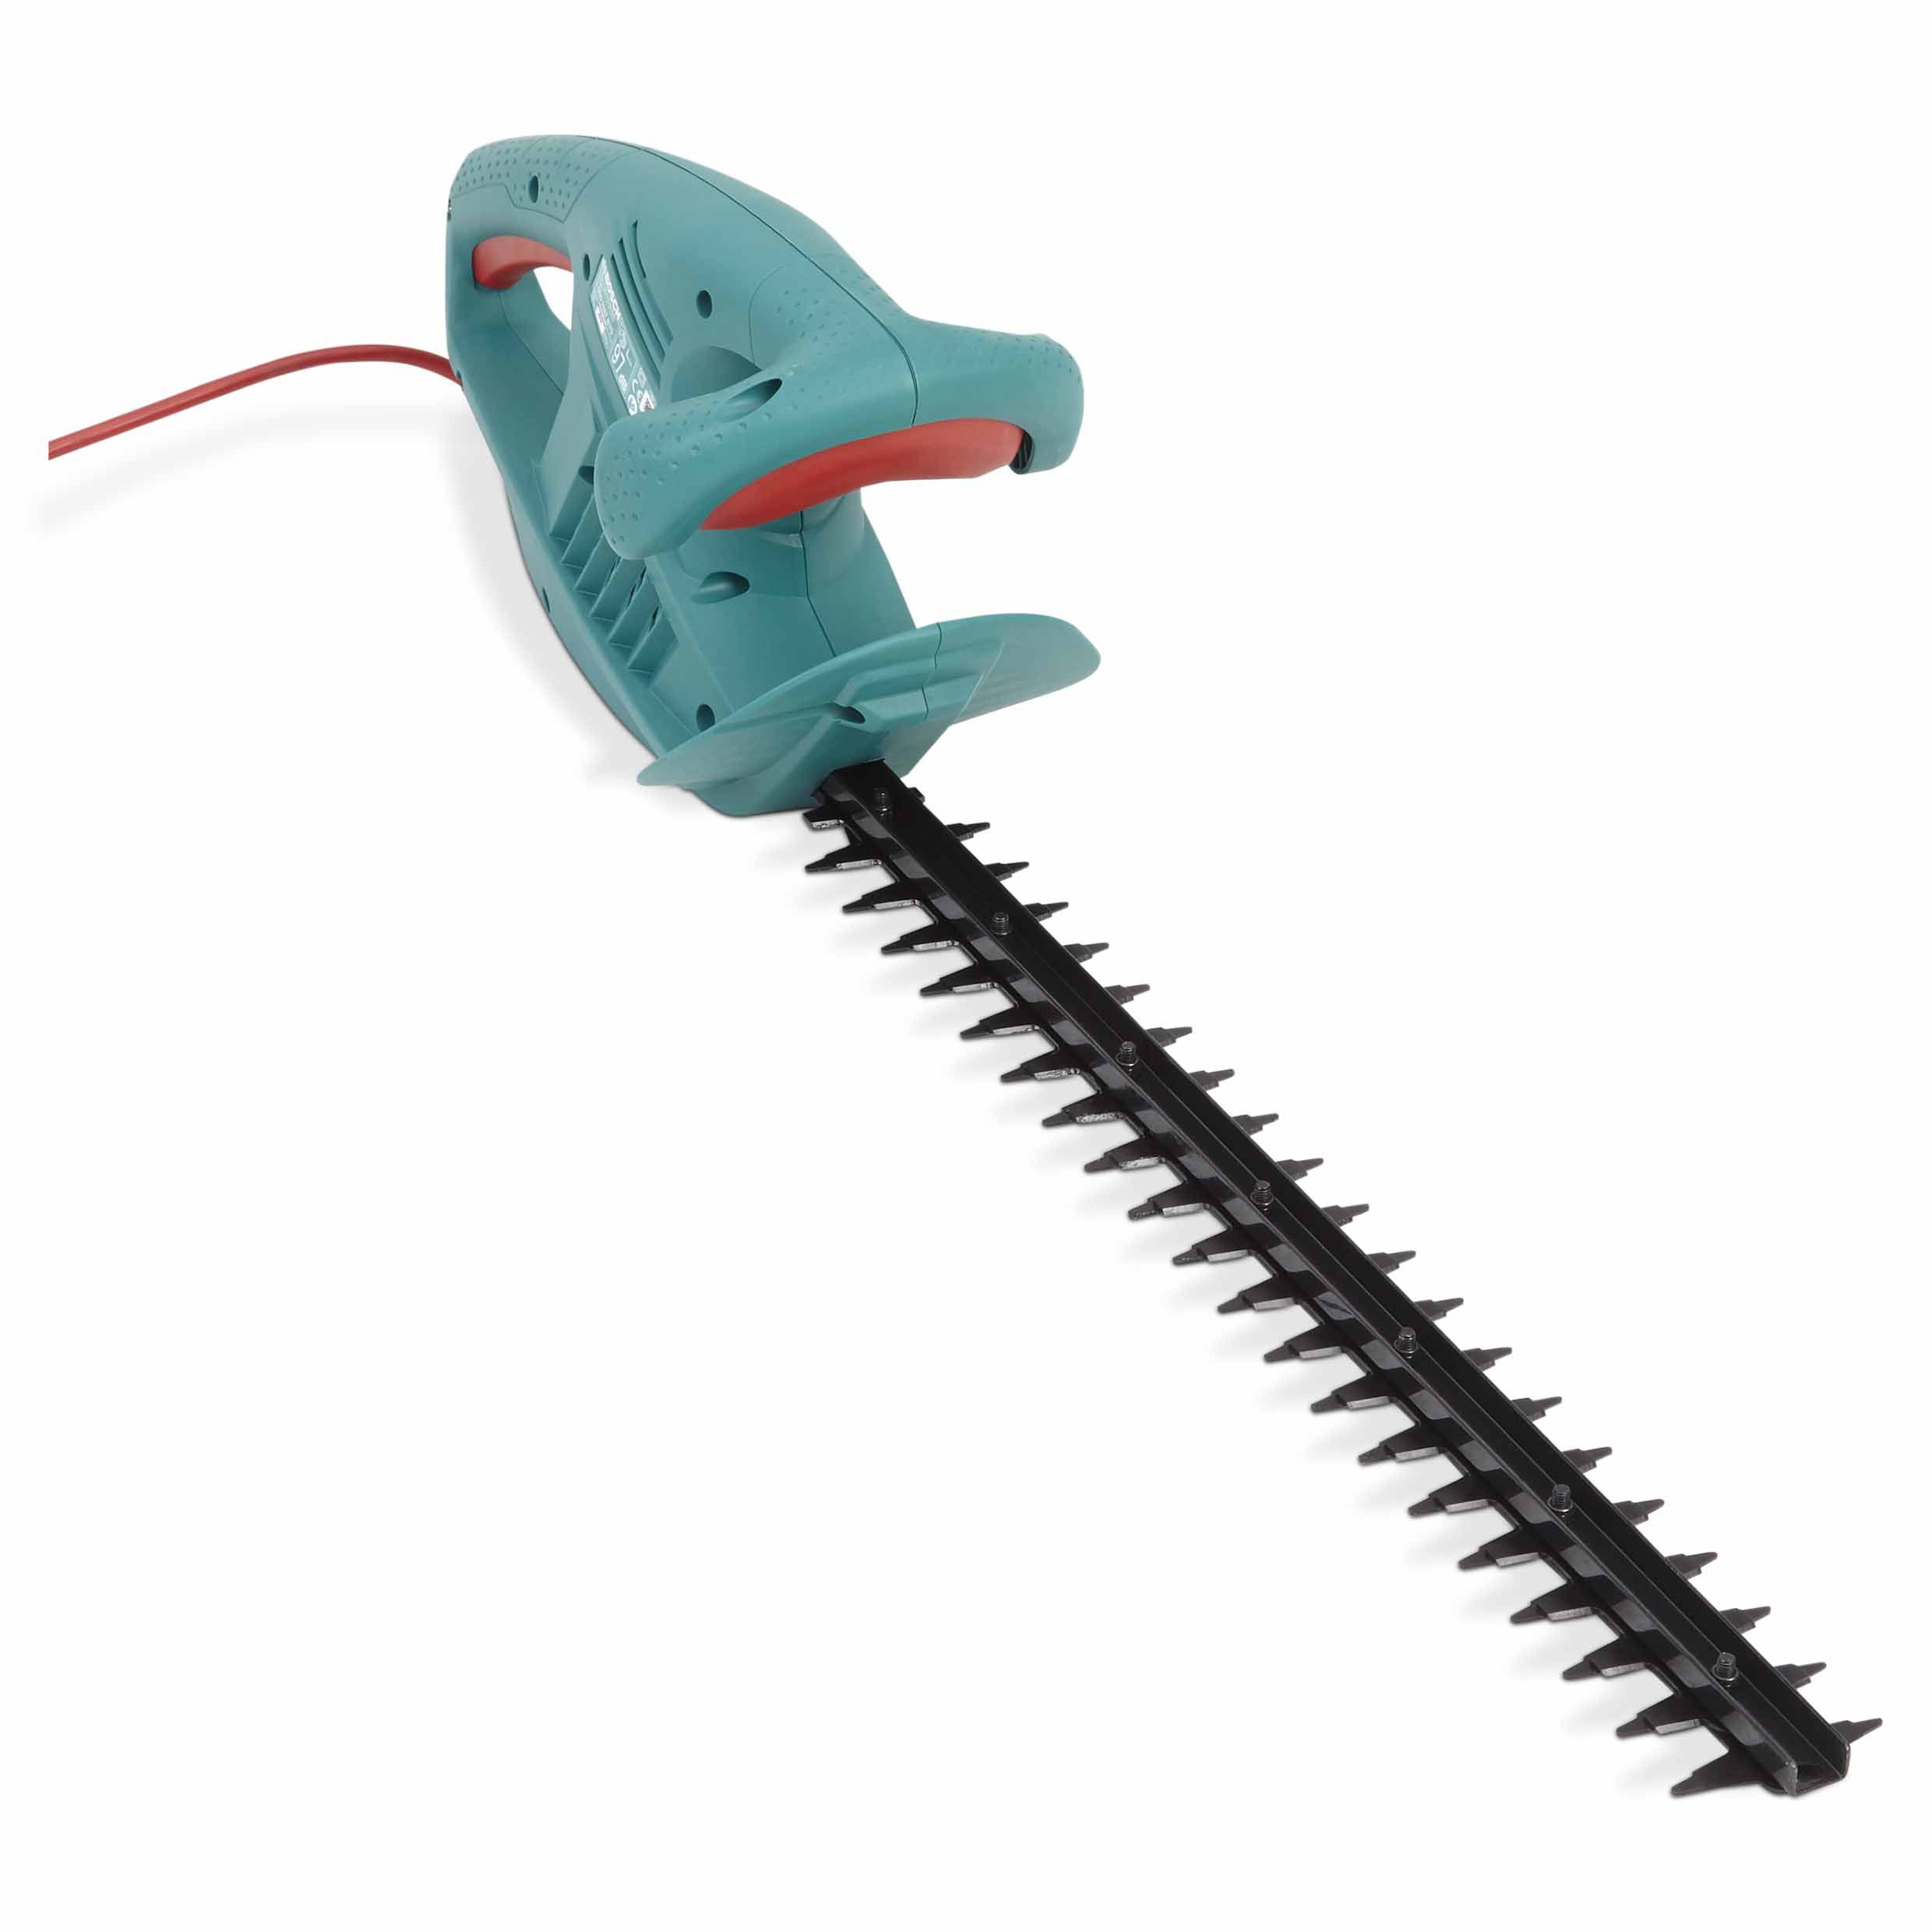 Bosch AHS 480-16 450W 480mm Corded Hedge trimmer